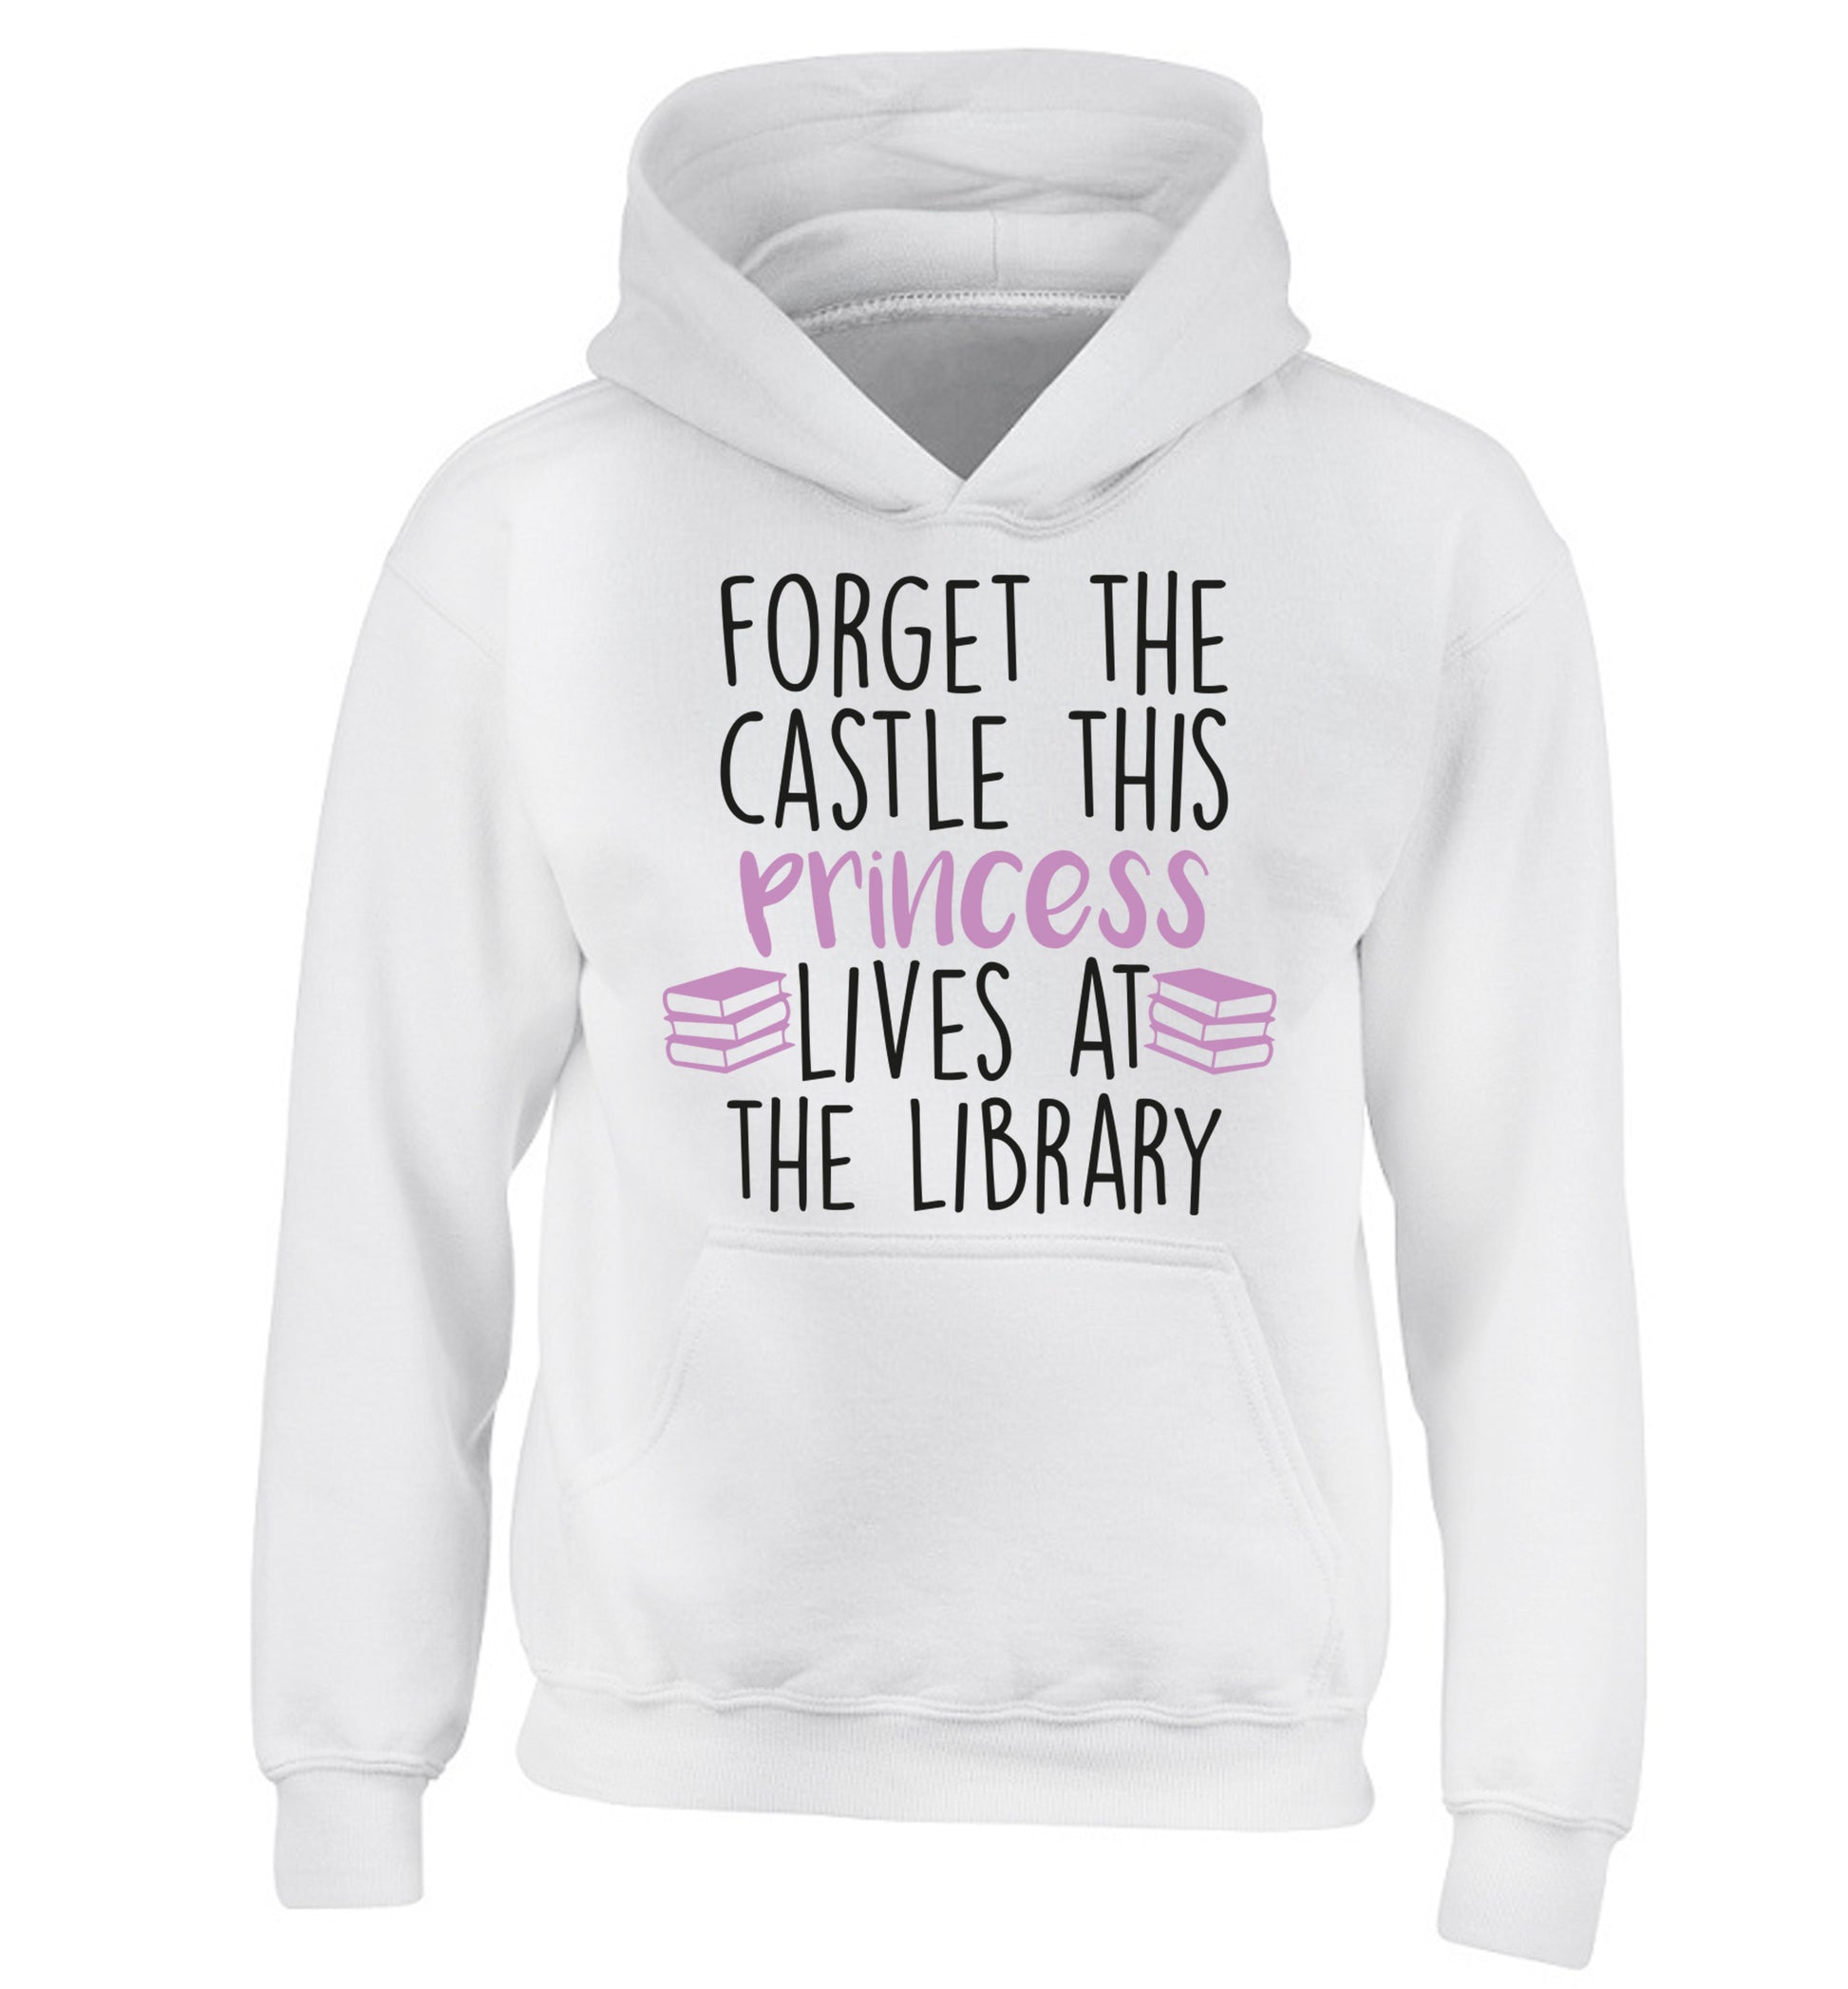 Forget the castle this princess lives at the library children's white hoodie 12-14 Years